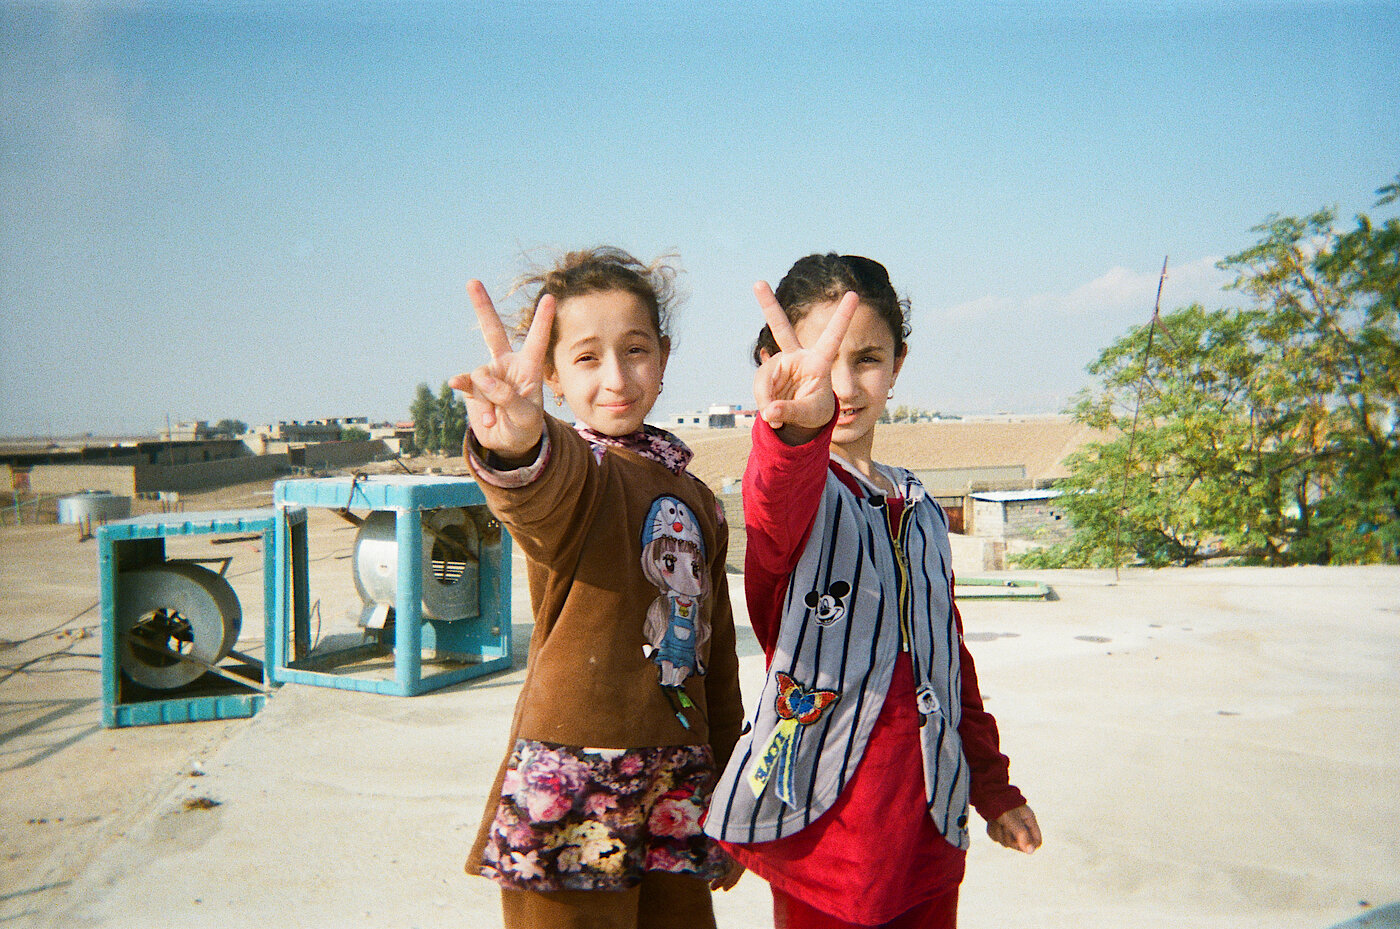 Photo: Two girls making the peace or victory sign with their hands.